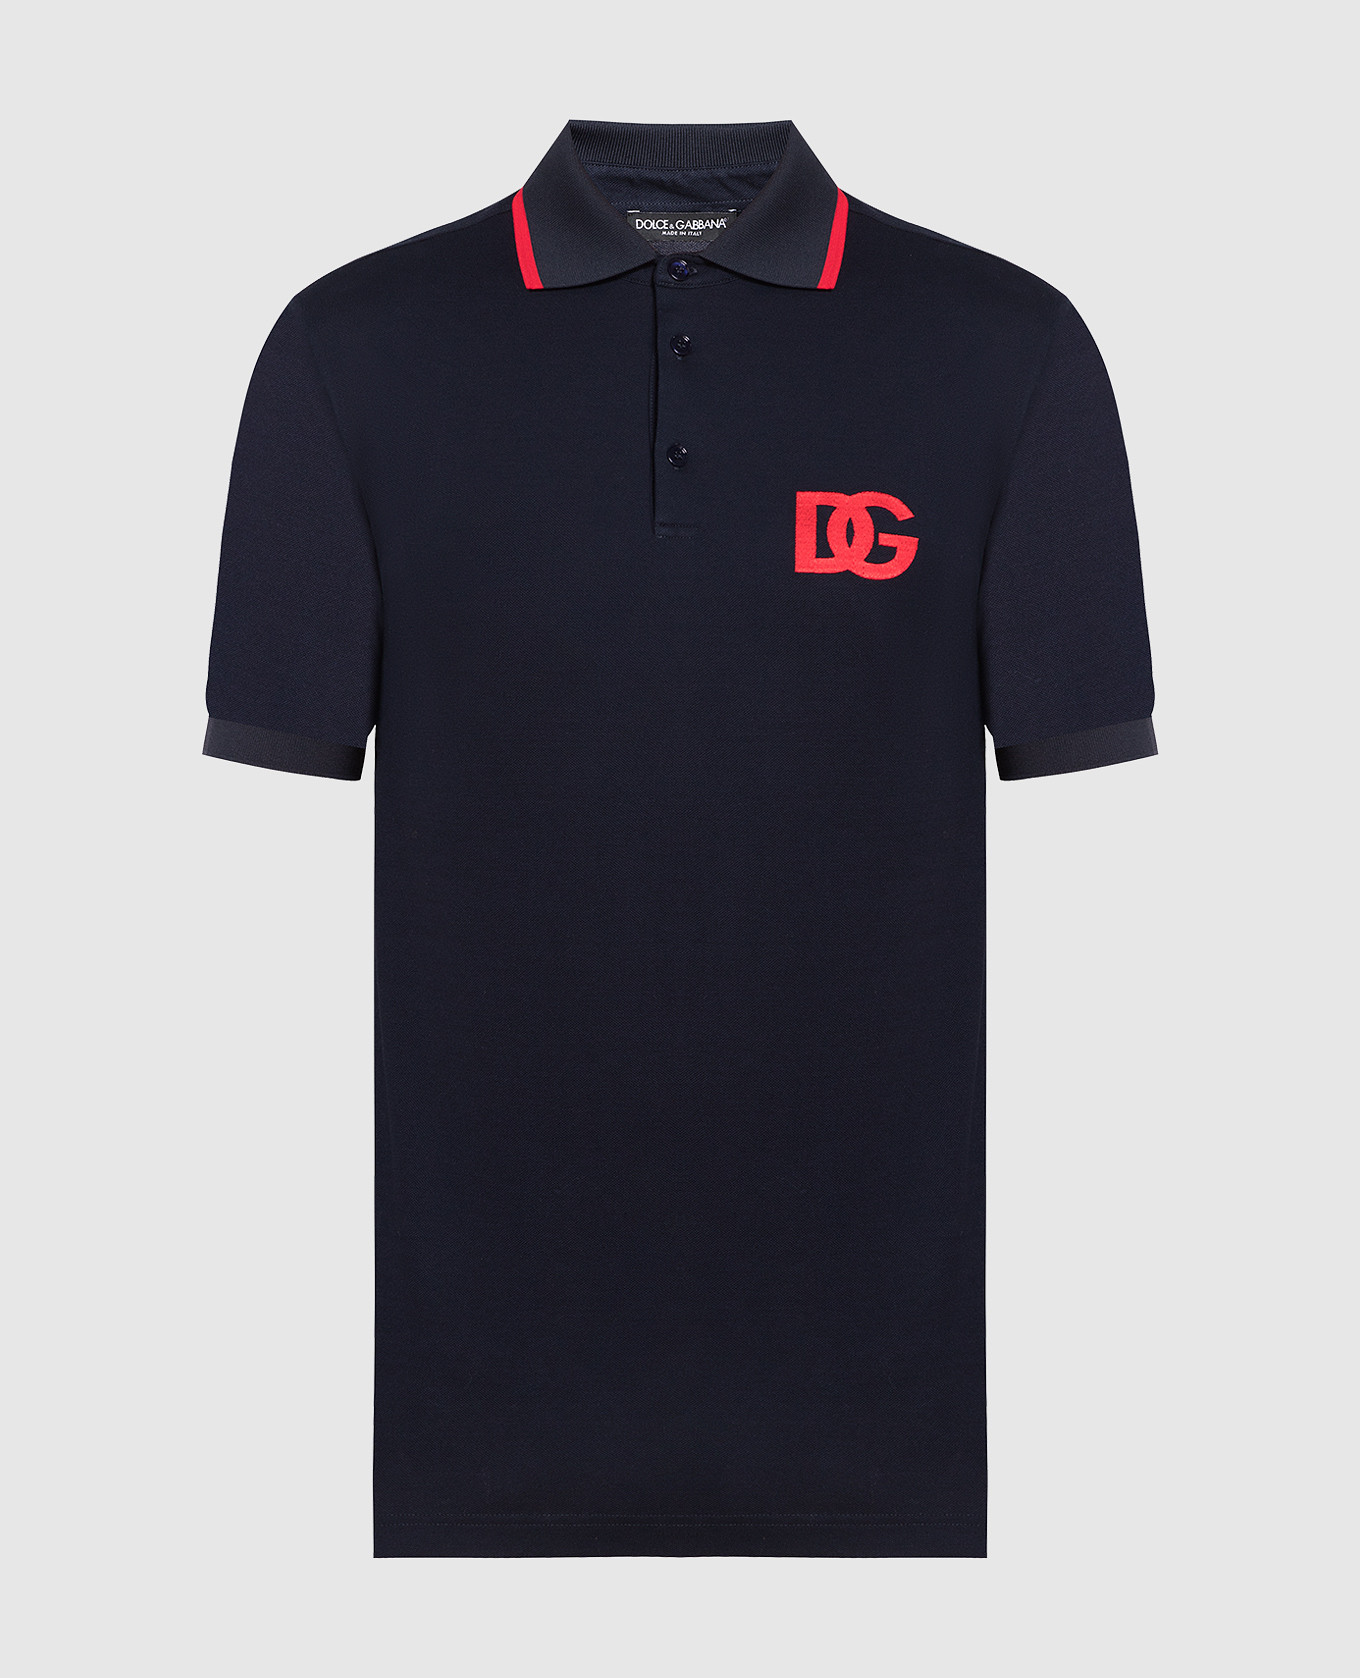 Blue polo with DG logo embroidery